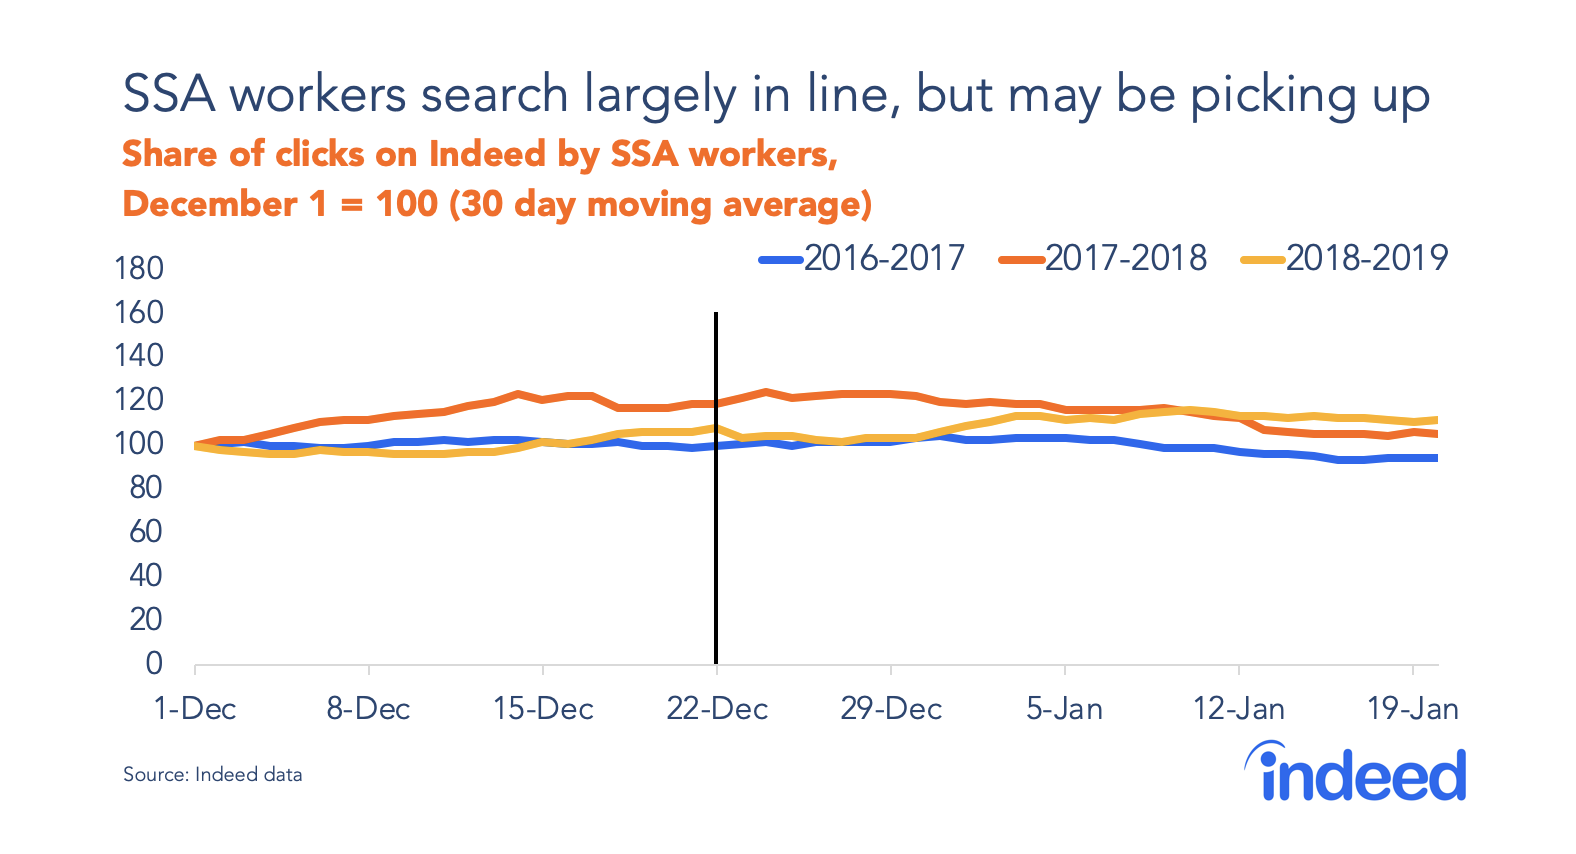 SSA workers search largely in line, but may be picking up